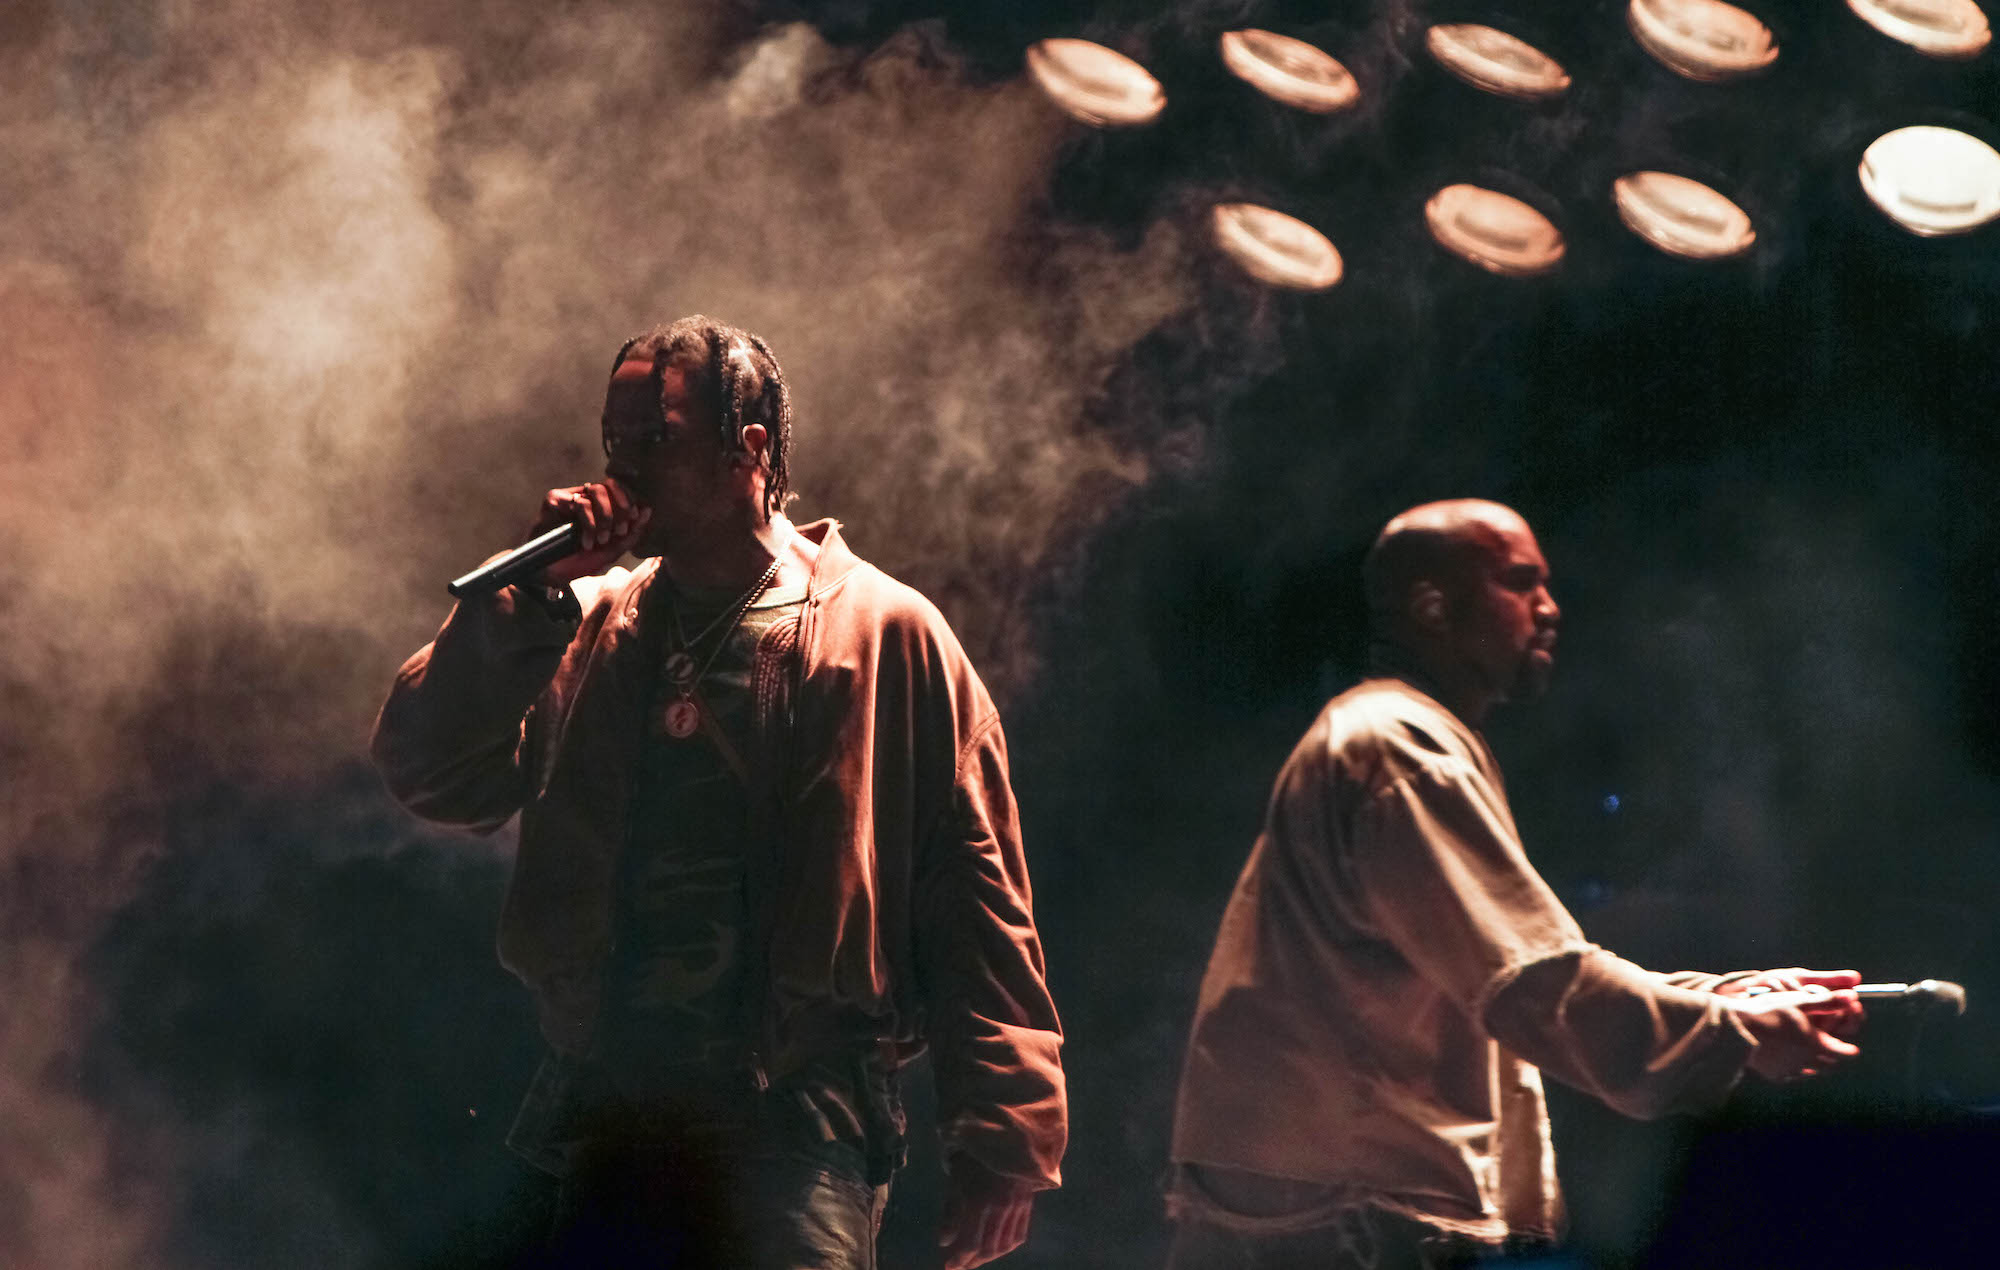 Travis Scott brings out Kanye West during Rome live stream